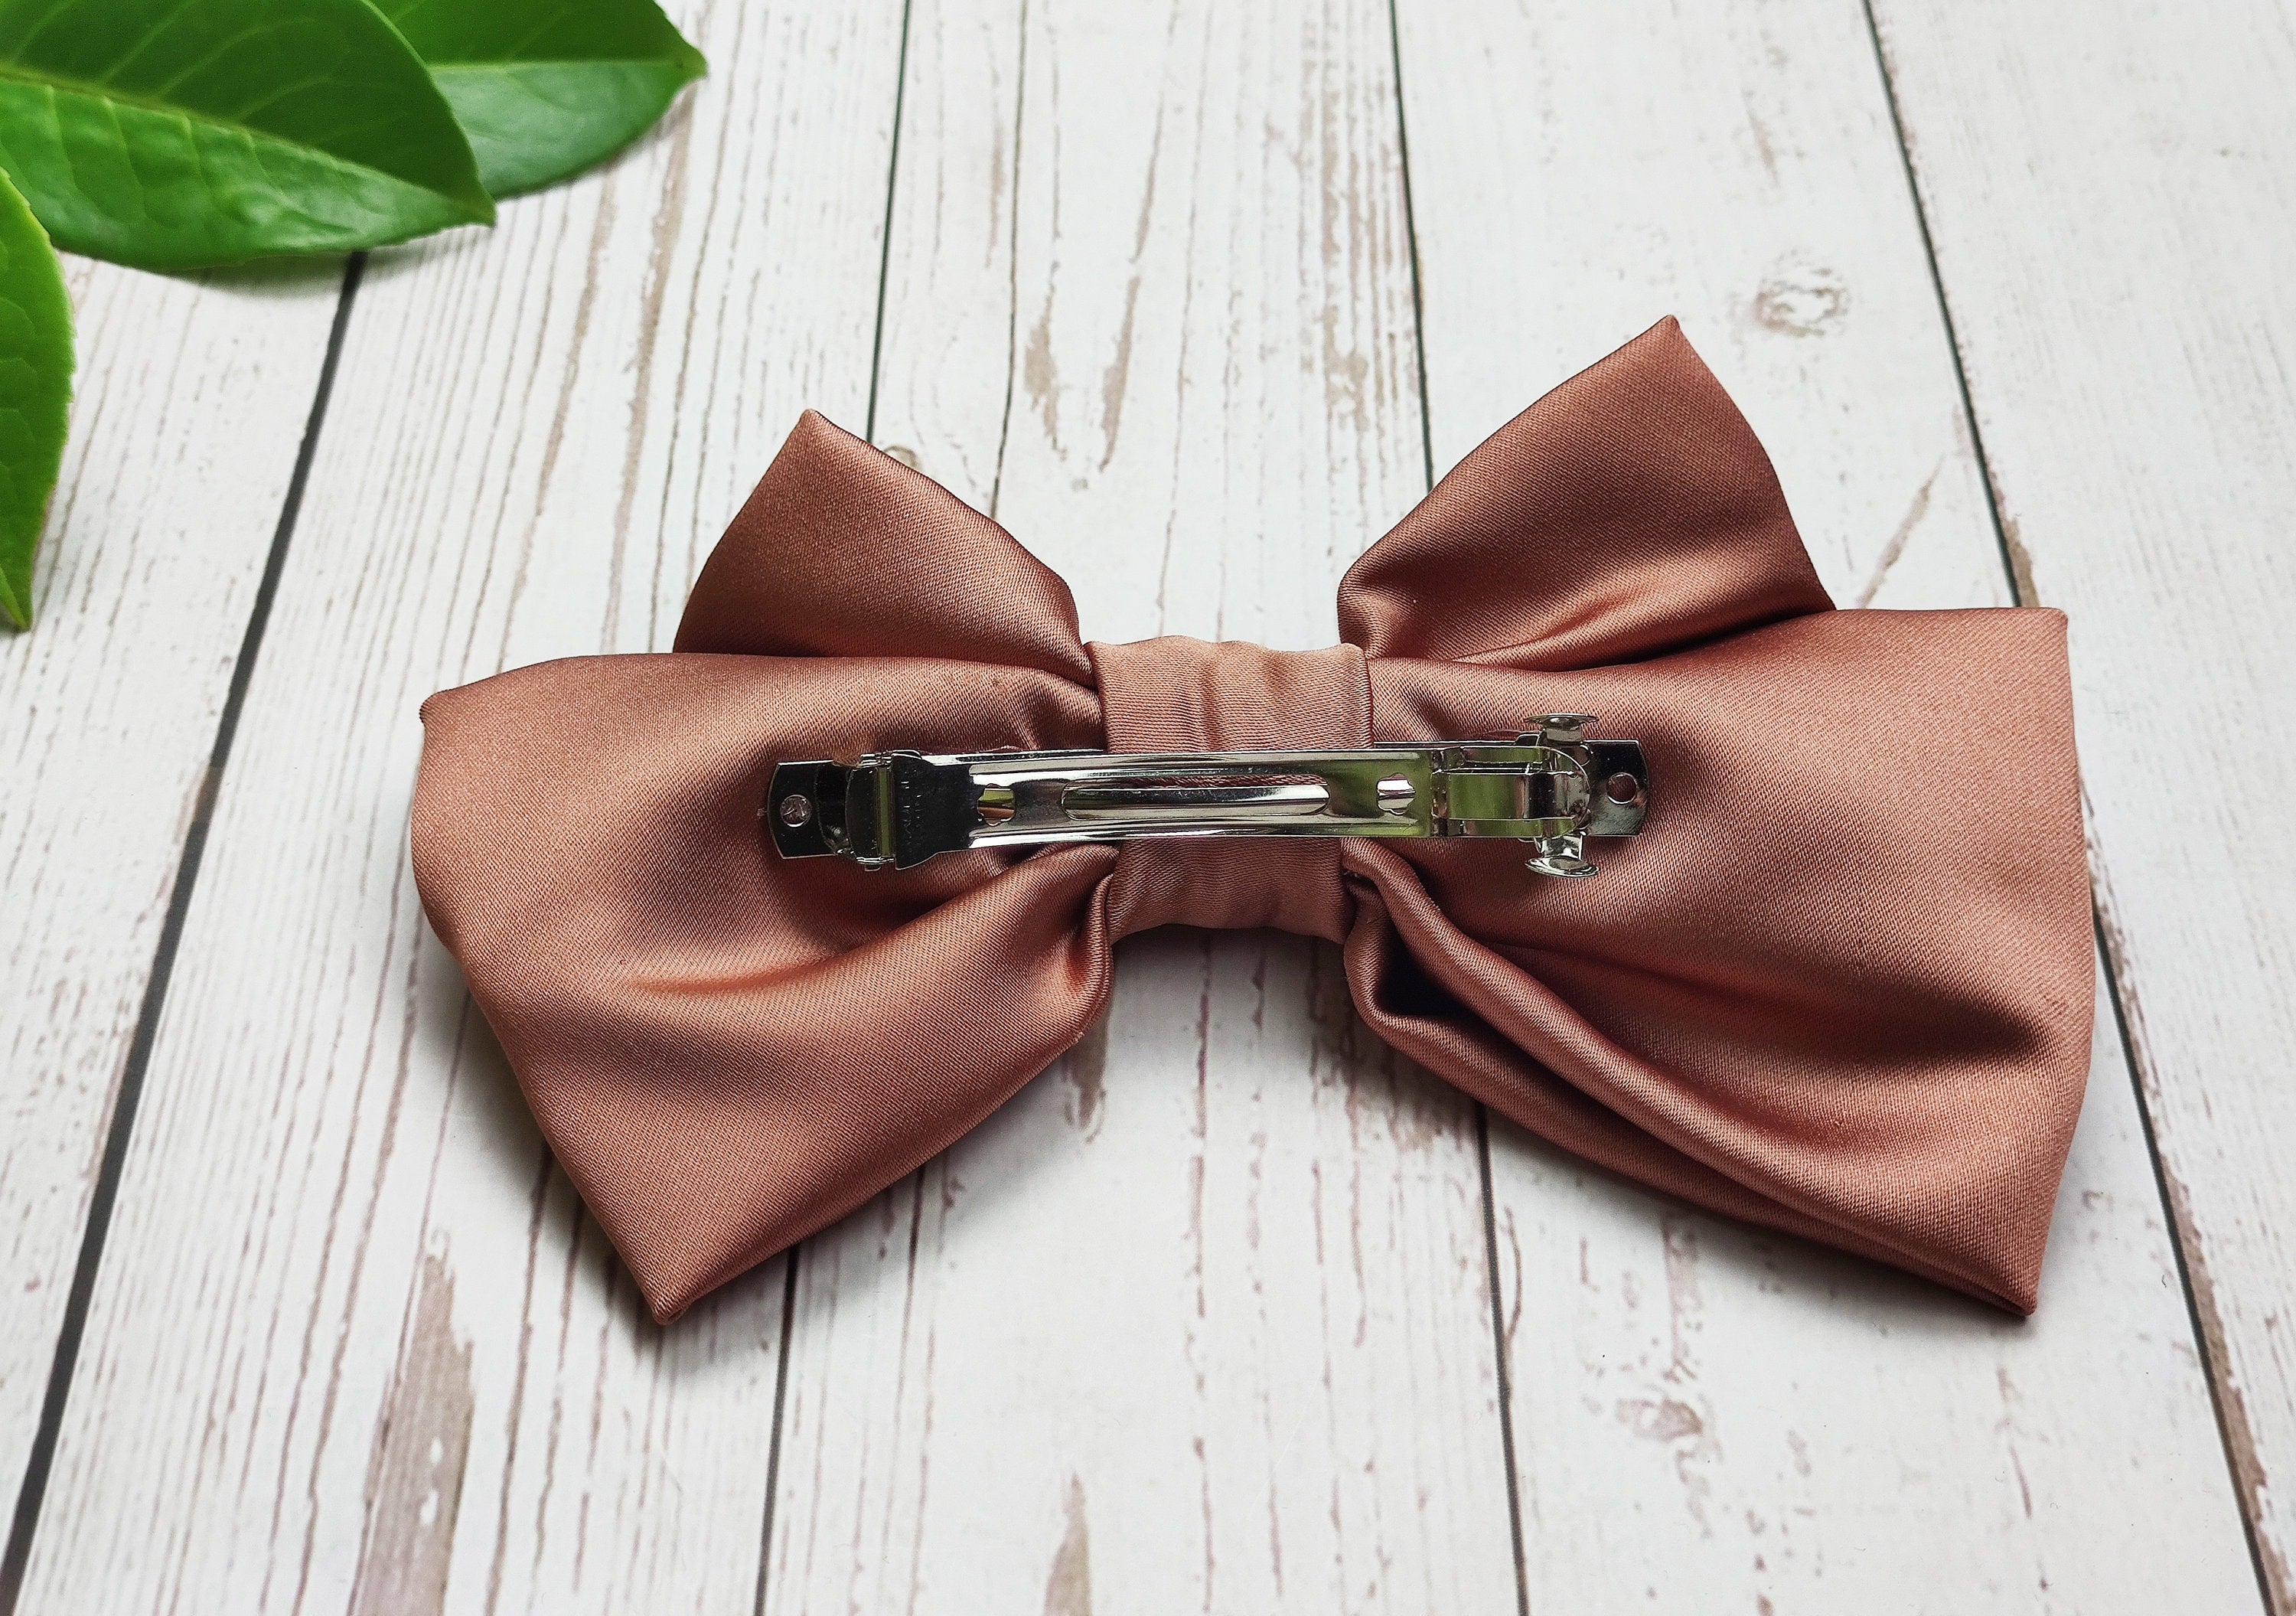 Elevate your everyday hairstyle with these handmade brick and beige satin hair clips with a bow. The fashionable hair accessory is a must-have for any woman who loves to accessorize.